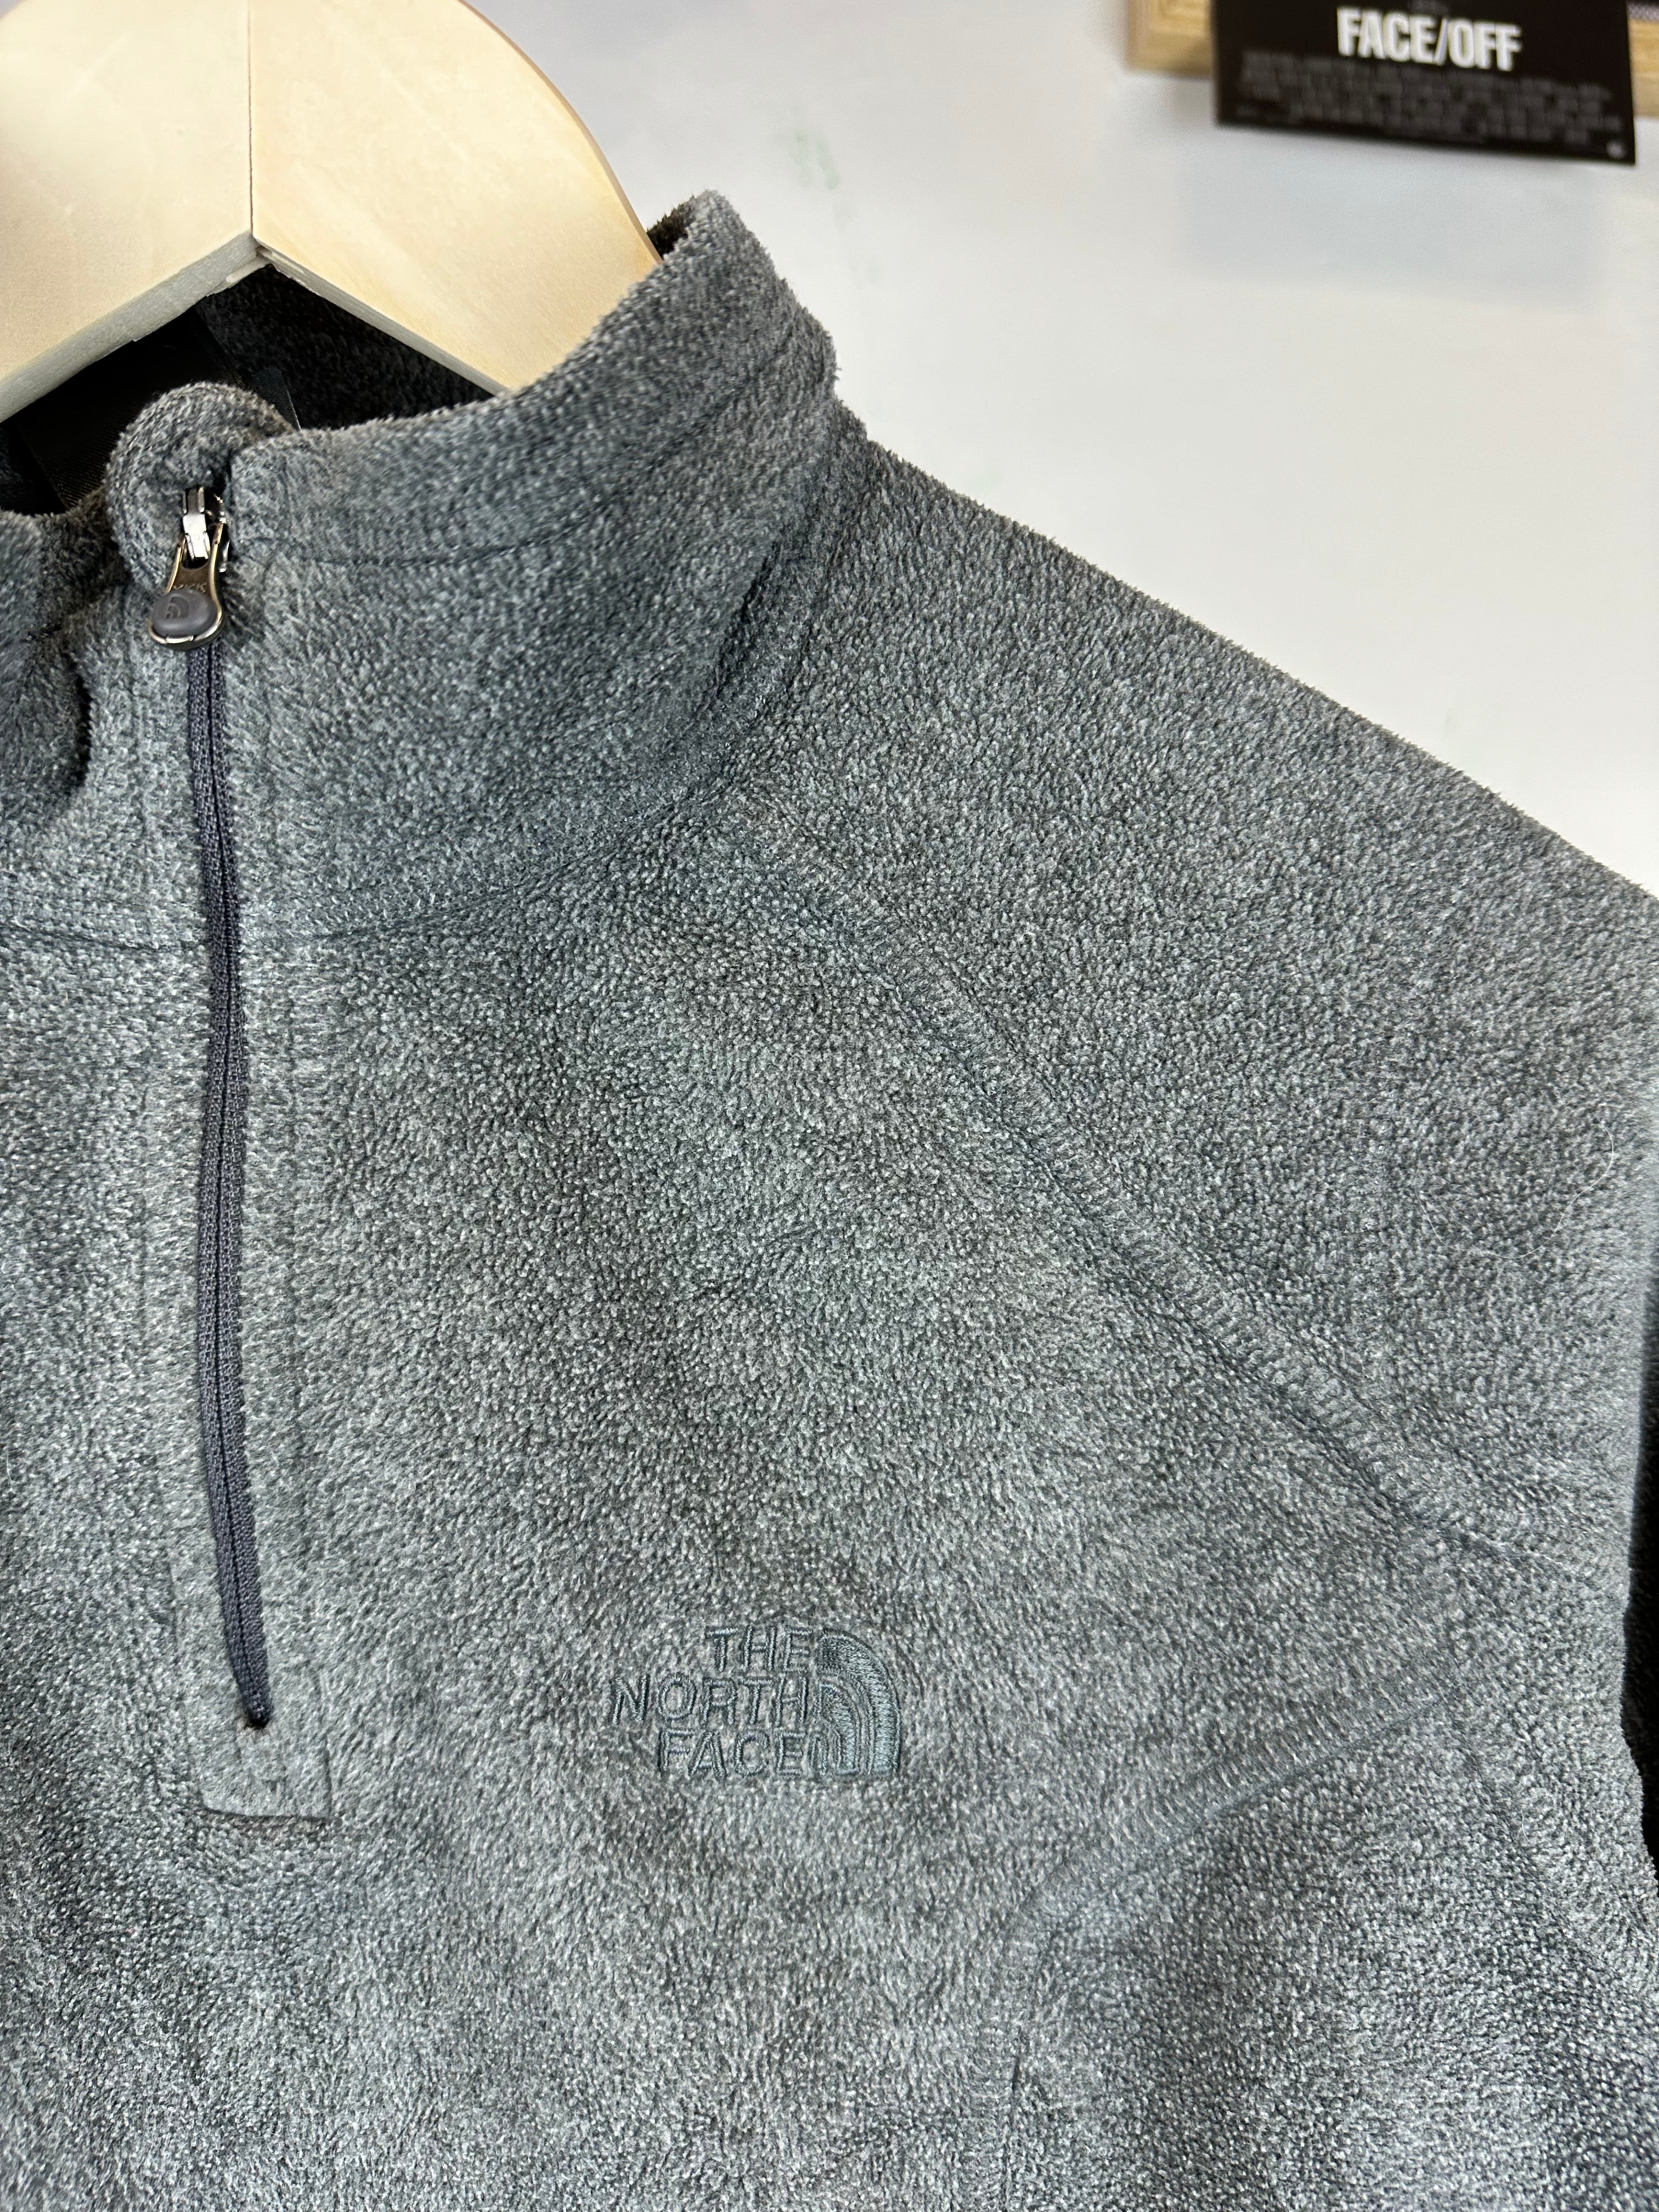 The North Face Fleece - size S